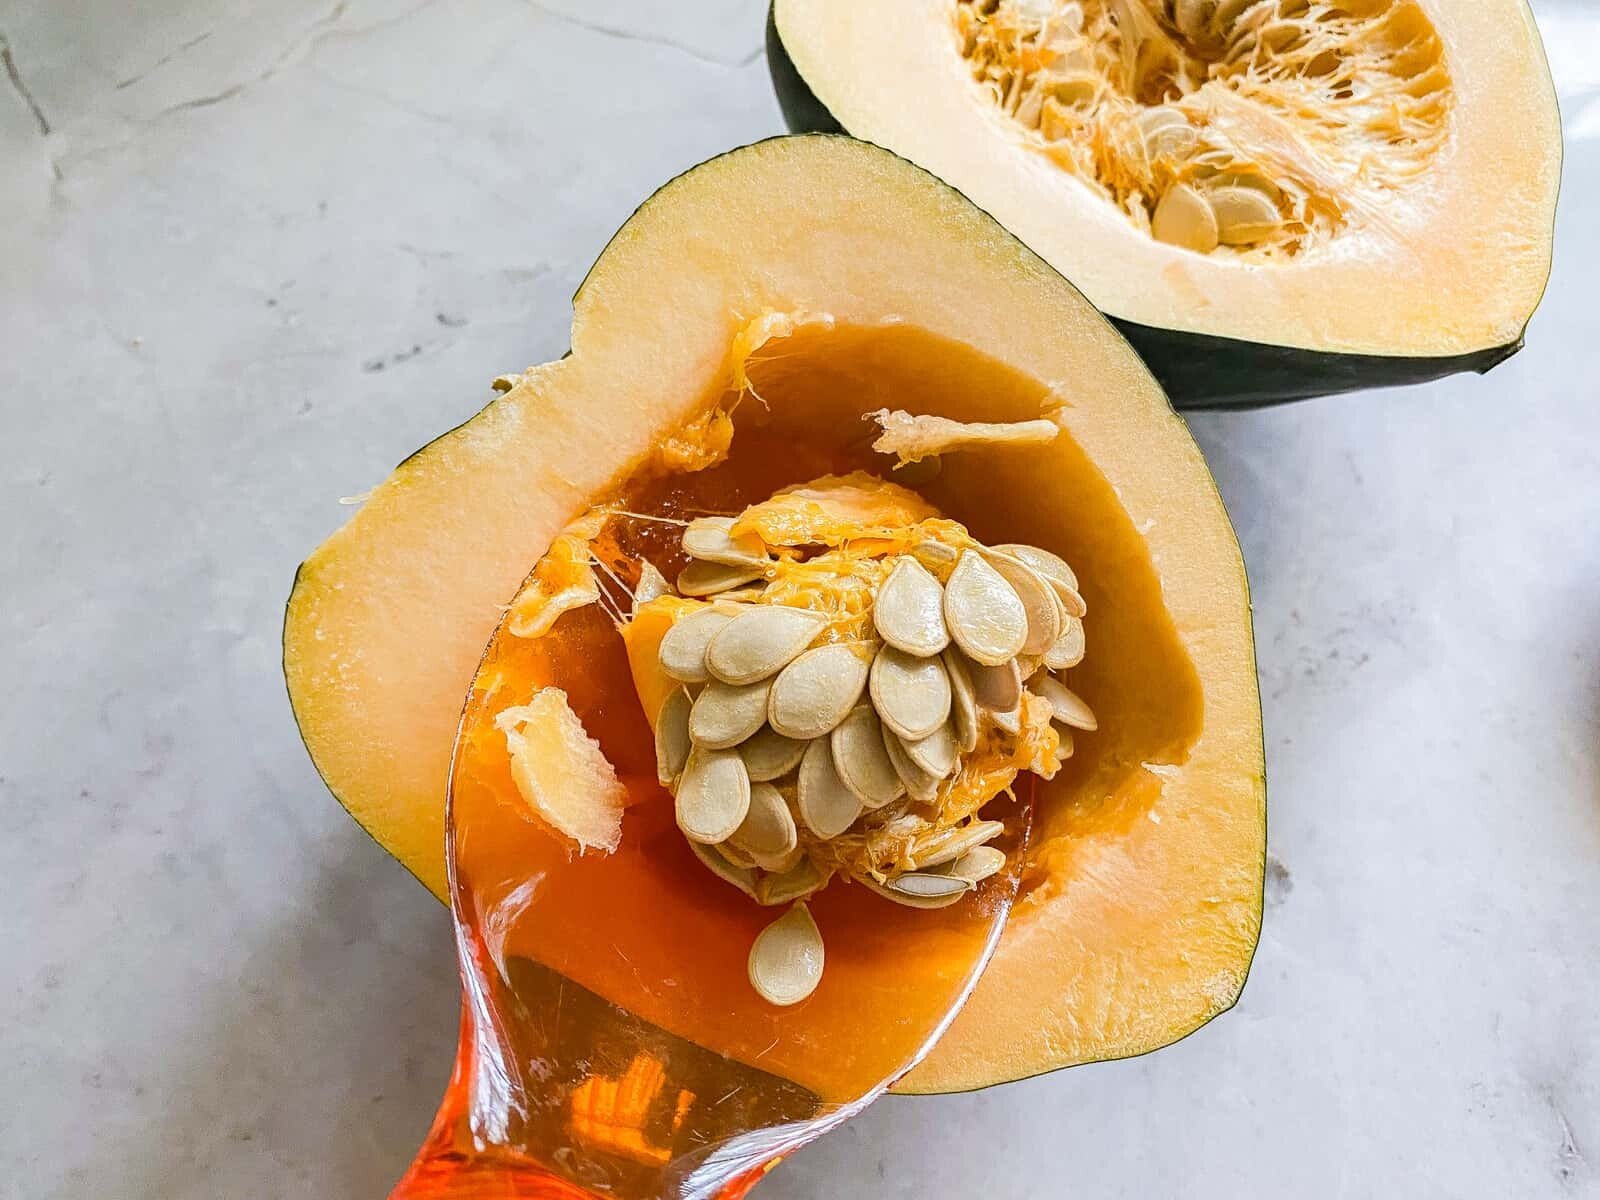 Orange scoop, scooping out seeds from the middle of a cut acorn squash.